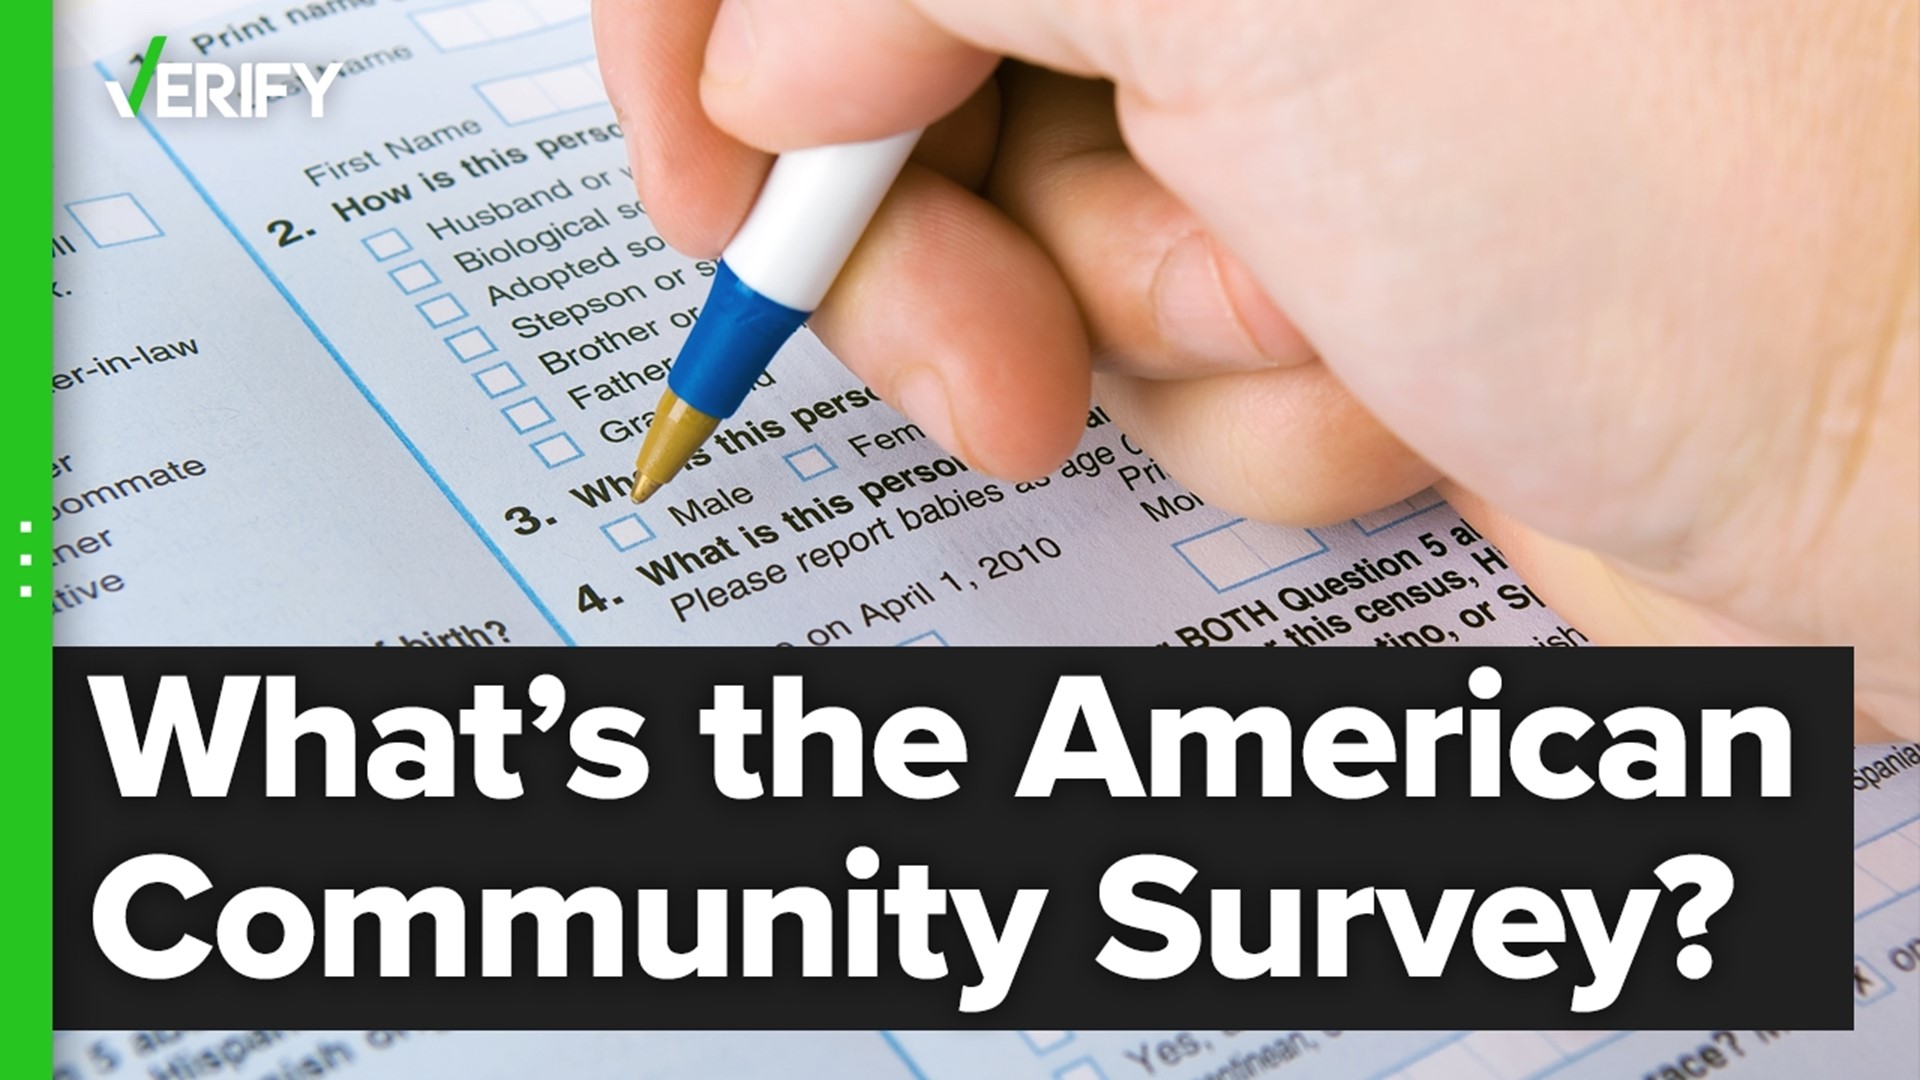 fact-checking-if-the-american-community-survey-is-legit-verifythis